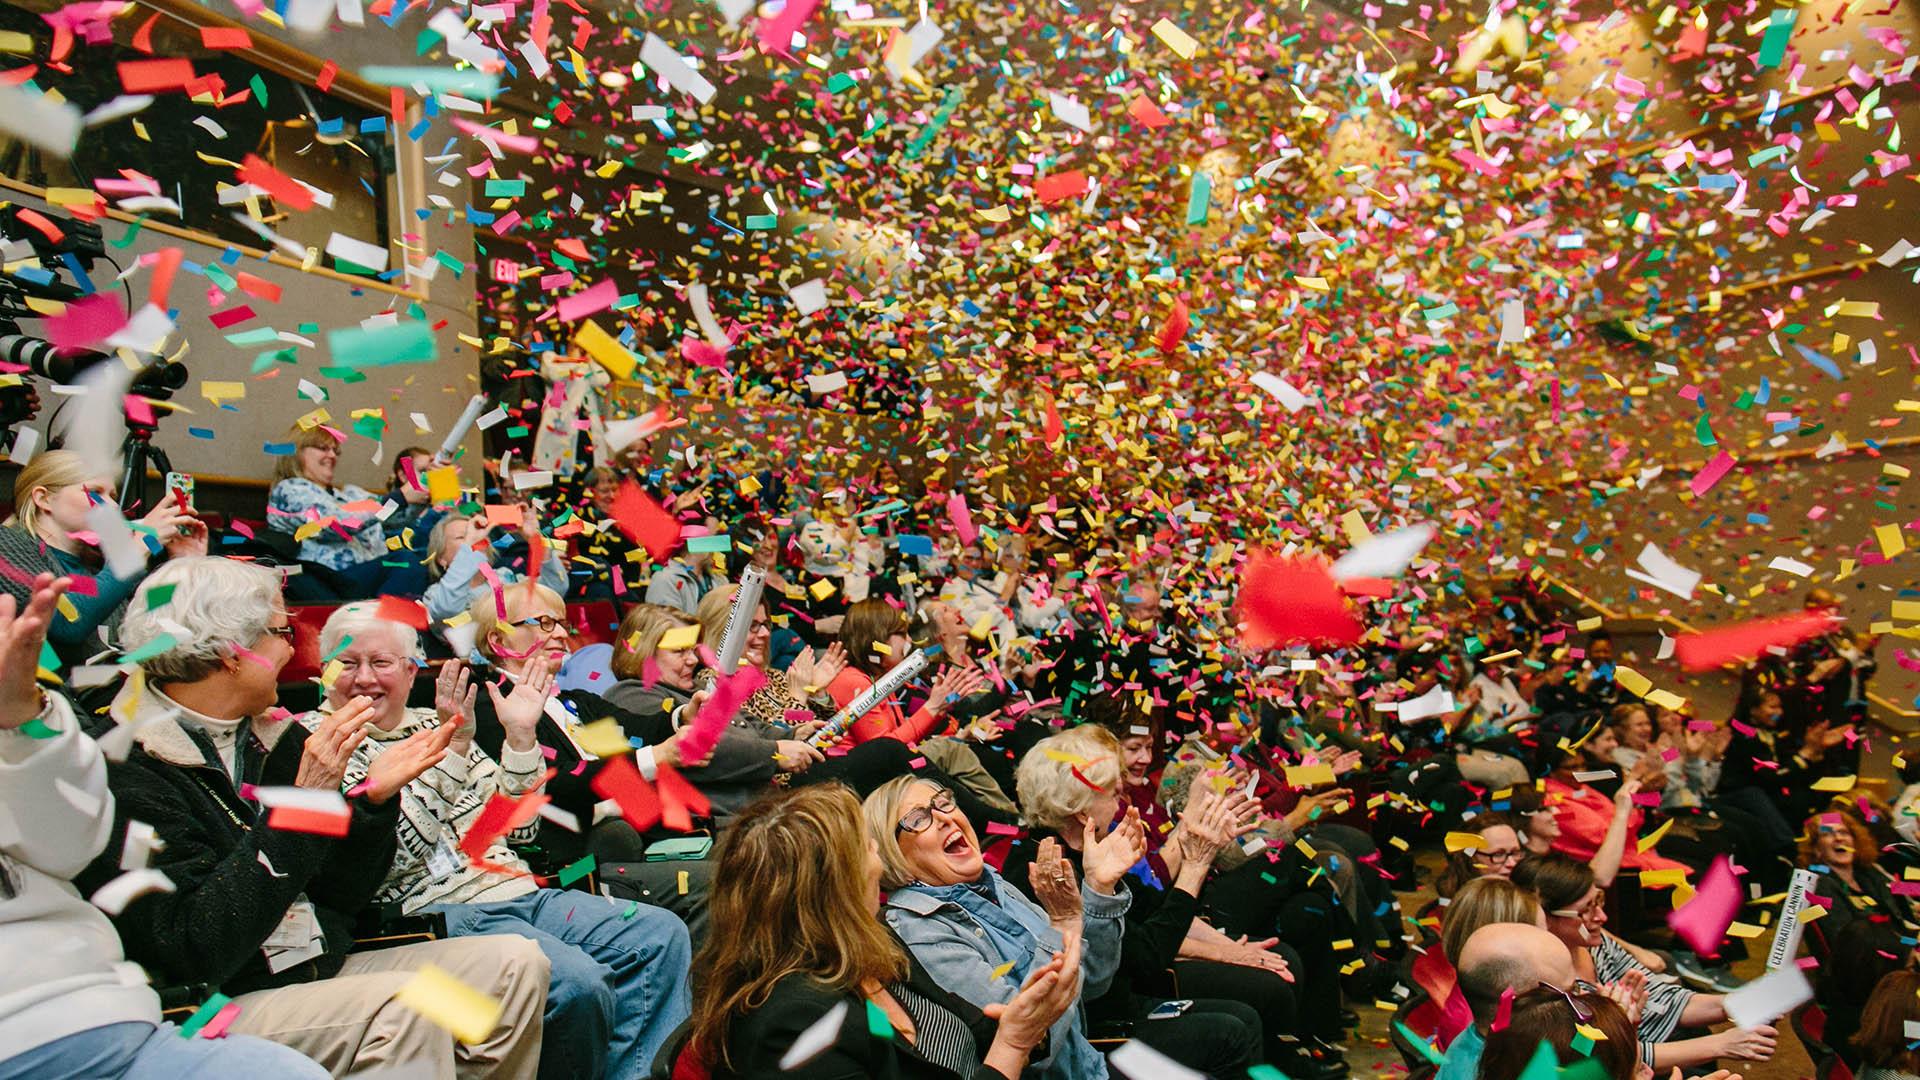 Joyful people clapping in an auditorium with colorful confetti filling the air